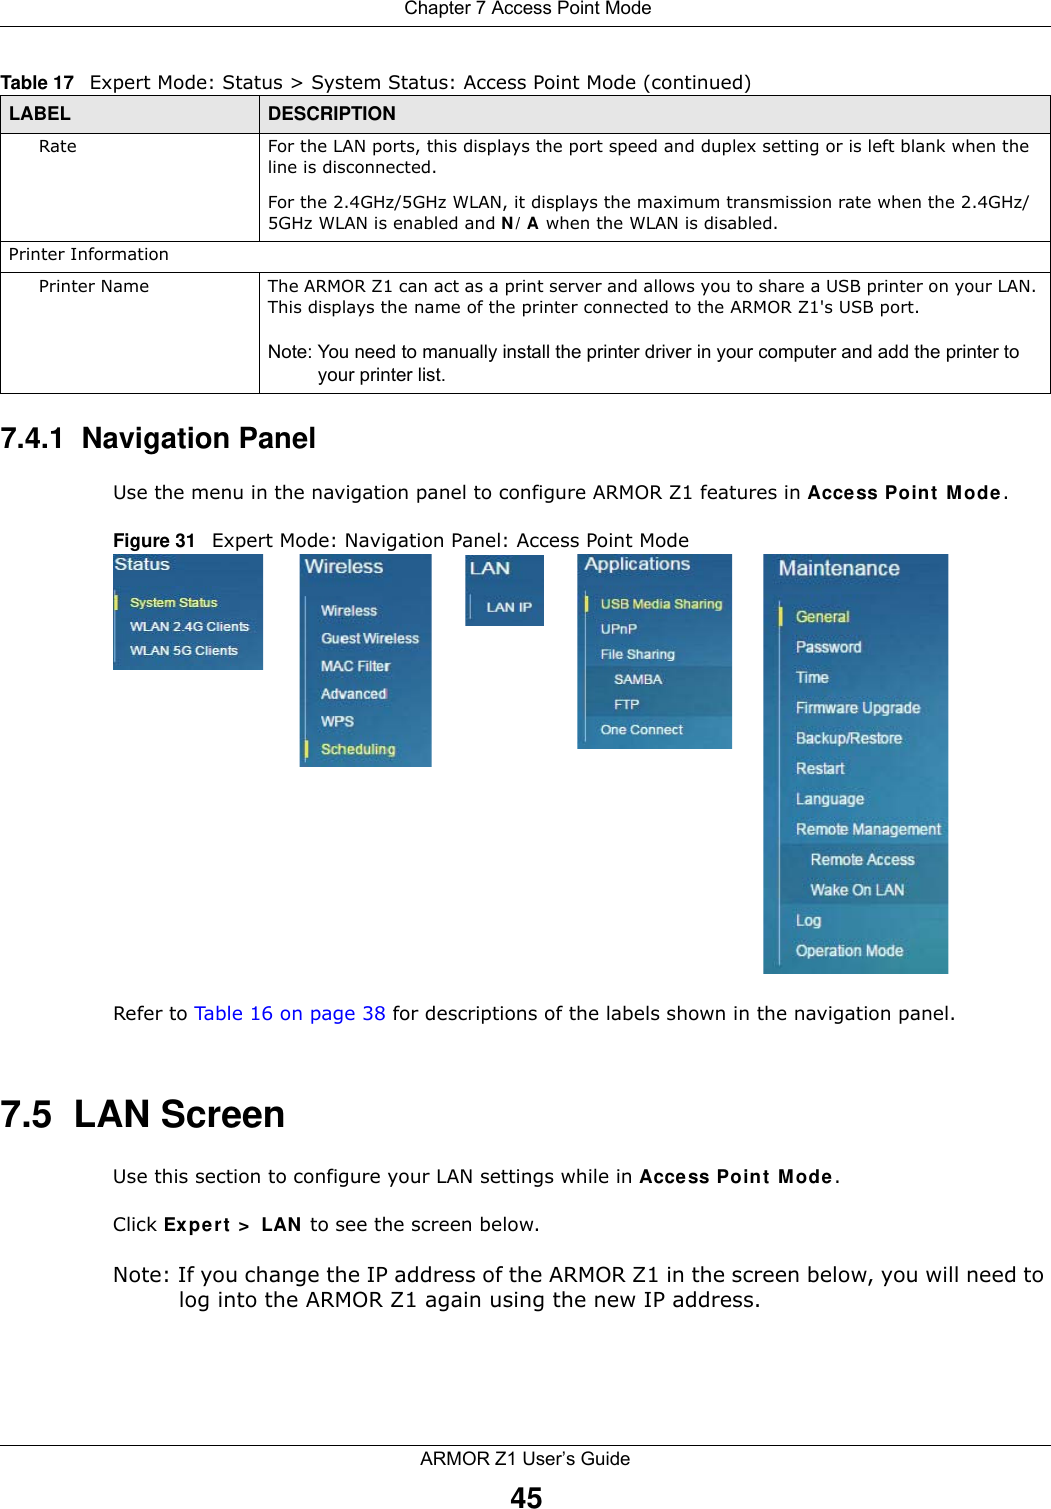  Chapter 7 Access Point ModeARMOR Z1 User’s Guide457.4.1  Navigation PanelUse the menu in the navigation panel to configure ARMOR Z1 features in Access Point Mode.Figure 31   Expert Mode: Navigation Panel: Access Point Mode Refer to Table 16 on page 38 for descriptions of the labels shown in the navigation panel.7.5  LAN ScreenUse this section to configure your LAN settings while in Access Point Mode. Click Expert &gt; LAN to see the screen below.Note: If you change the IP address of the ARMOR Z1 in the screen below, you will need to log into the ARMOR Z1 again using the new IP address.Rate For the LAN ports, this displays the port speed and duplex setting or is left blank when the line is disconnected.For the 2.4GHz/5GHz WLAN, it displays the maximum transmission rate when the 2.4GHz/5GHz WLAN is enabled and N/A when the WLAN is disabled.Printer InformationPrinter Name The ARMOR Z1 can act as a print server and allows you to share a USB printer on your LAN. This displays the name of the printer connected to the ARMOR Z1&apos;s USB port.Note: You need to manually install the printer driver in your computer and add the printer to your printer list.Table 17   Expert Mode: Status &gt; System Status: Access Point Mode (continued) LABEL DESCRIPTION